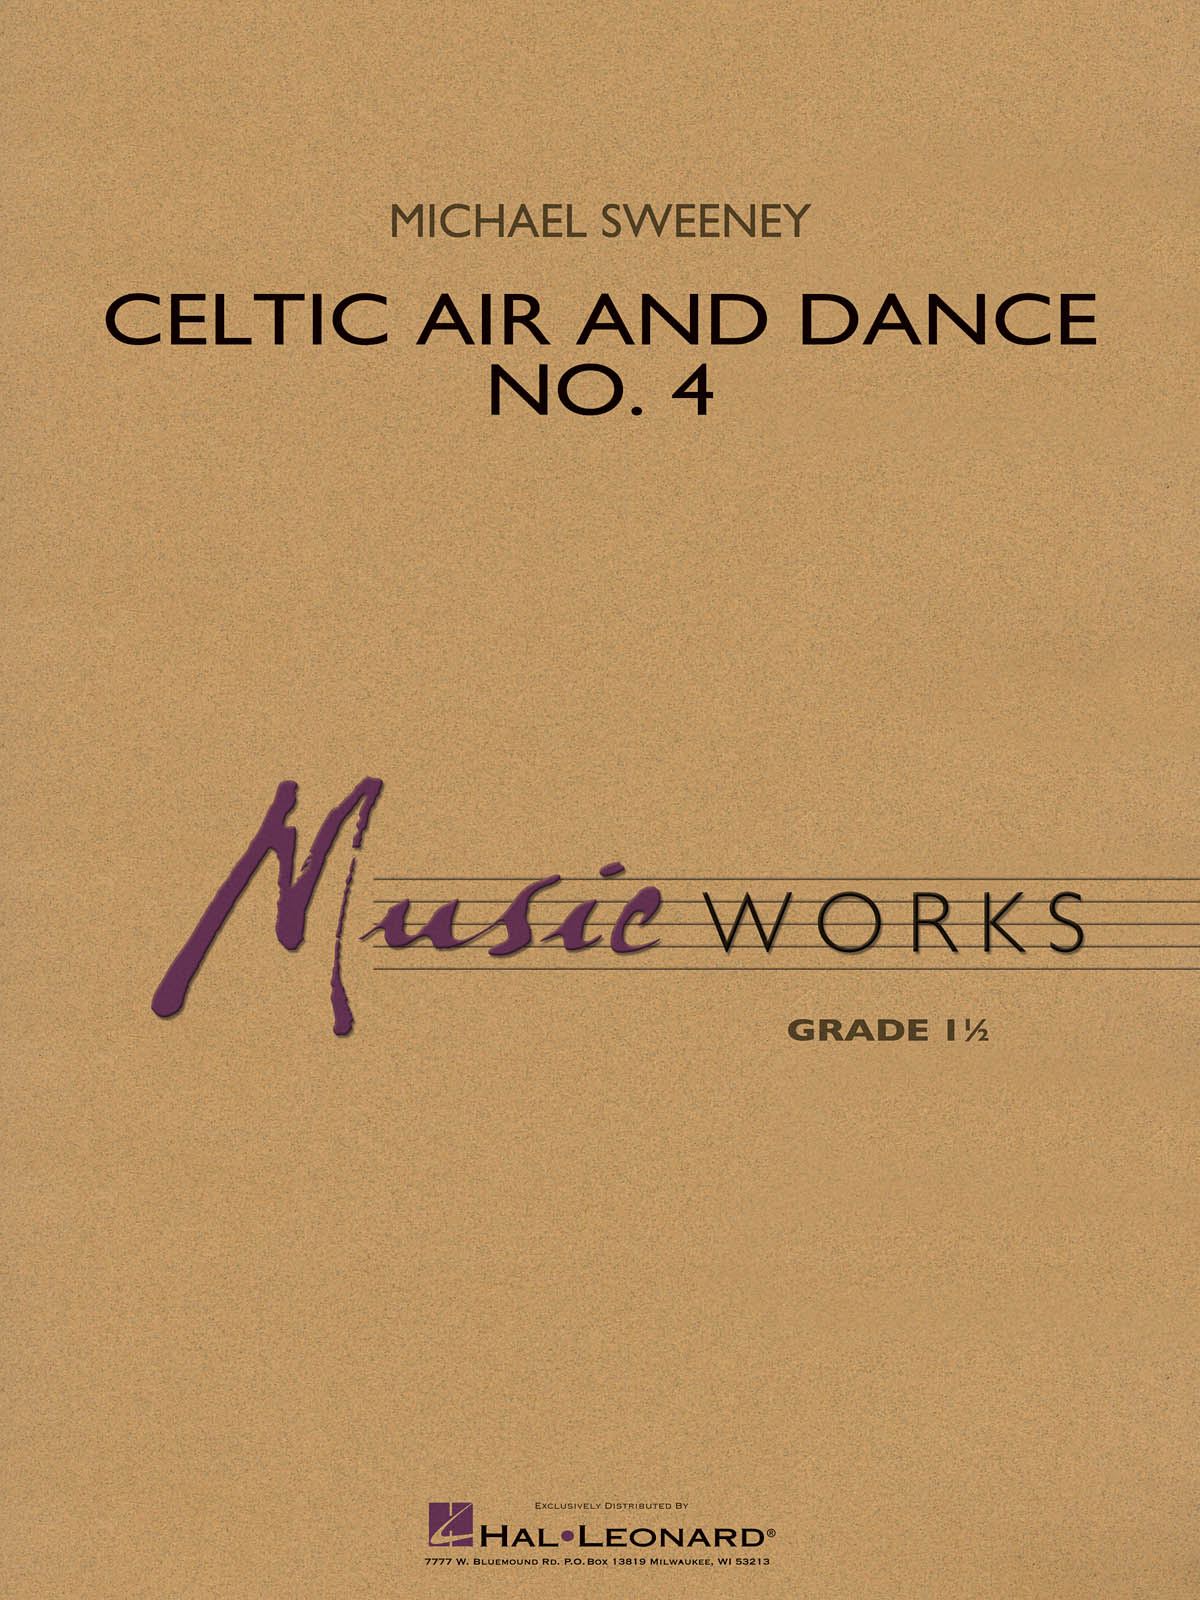 Michael Sweeney: Celtic Air and Dance No. 4: Concert Band: Score